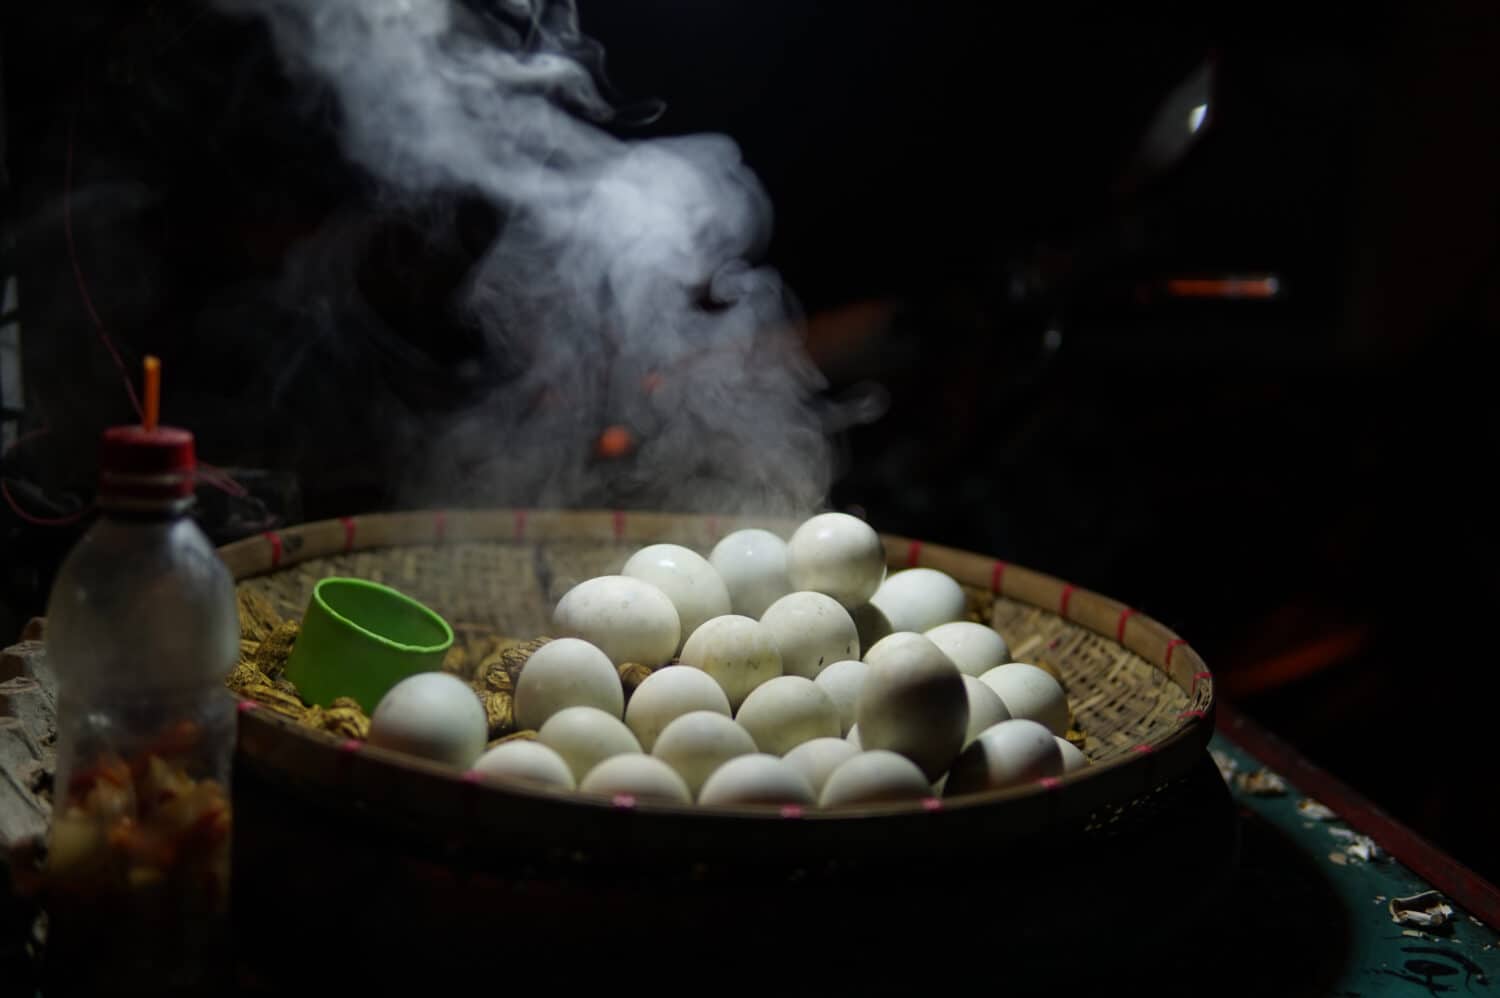 A steaming pile of balut, a duck egg delicacy in the Philippines, placed together with shelled peanuts on a bilao, or a traditional woven tray.